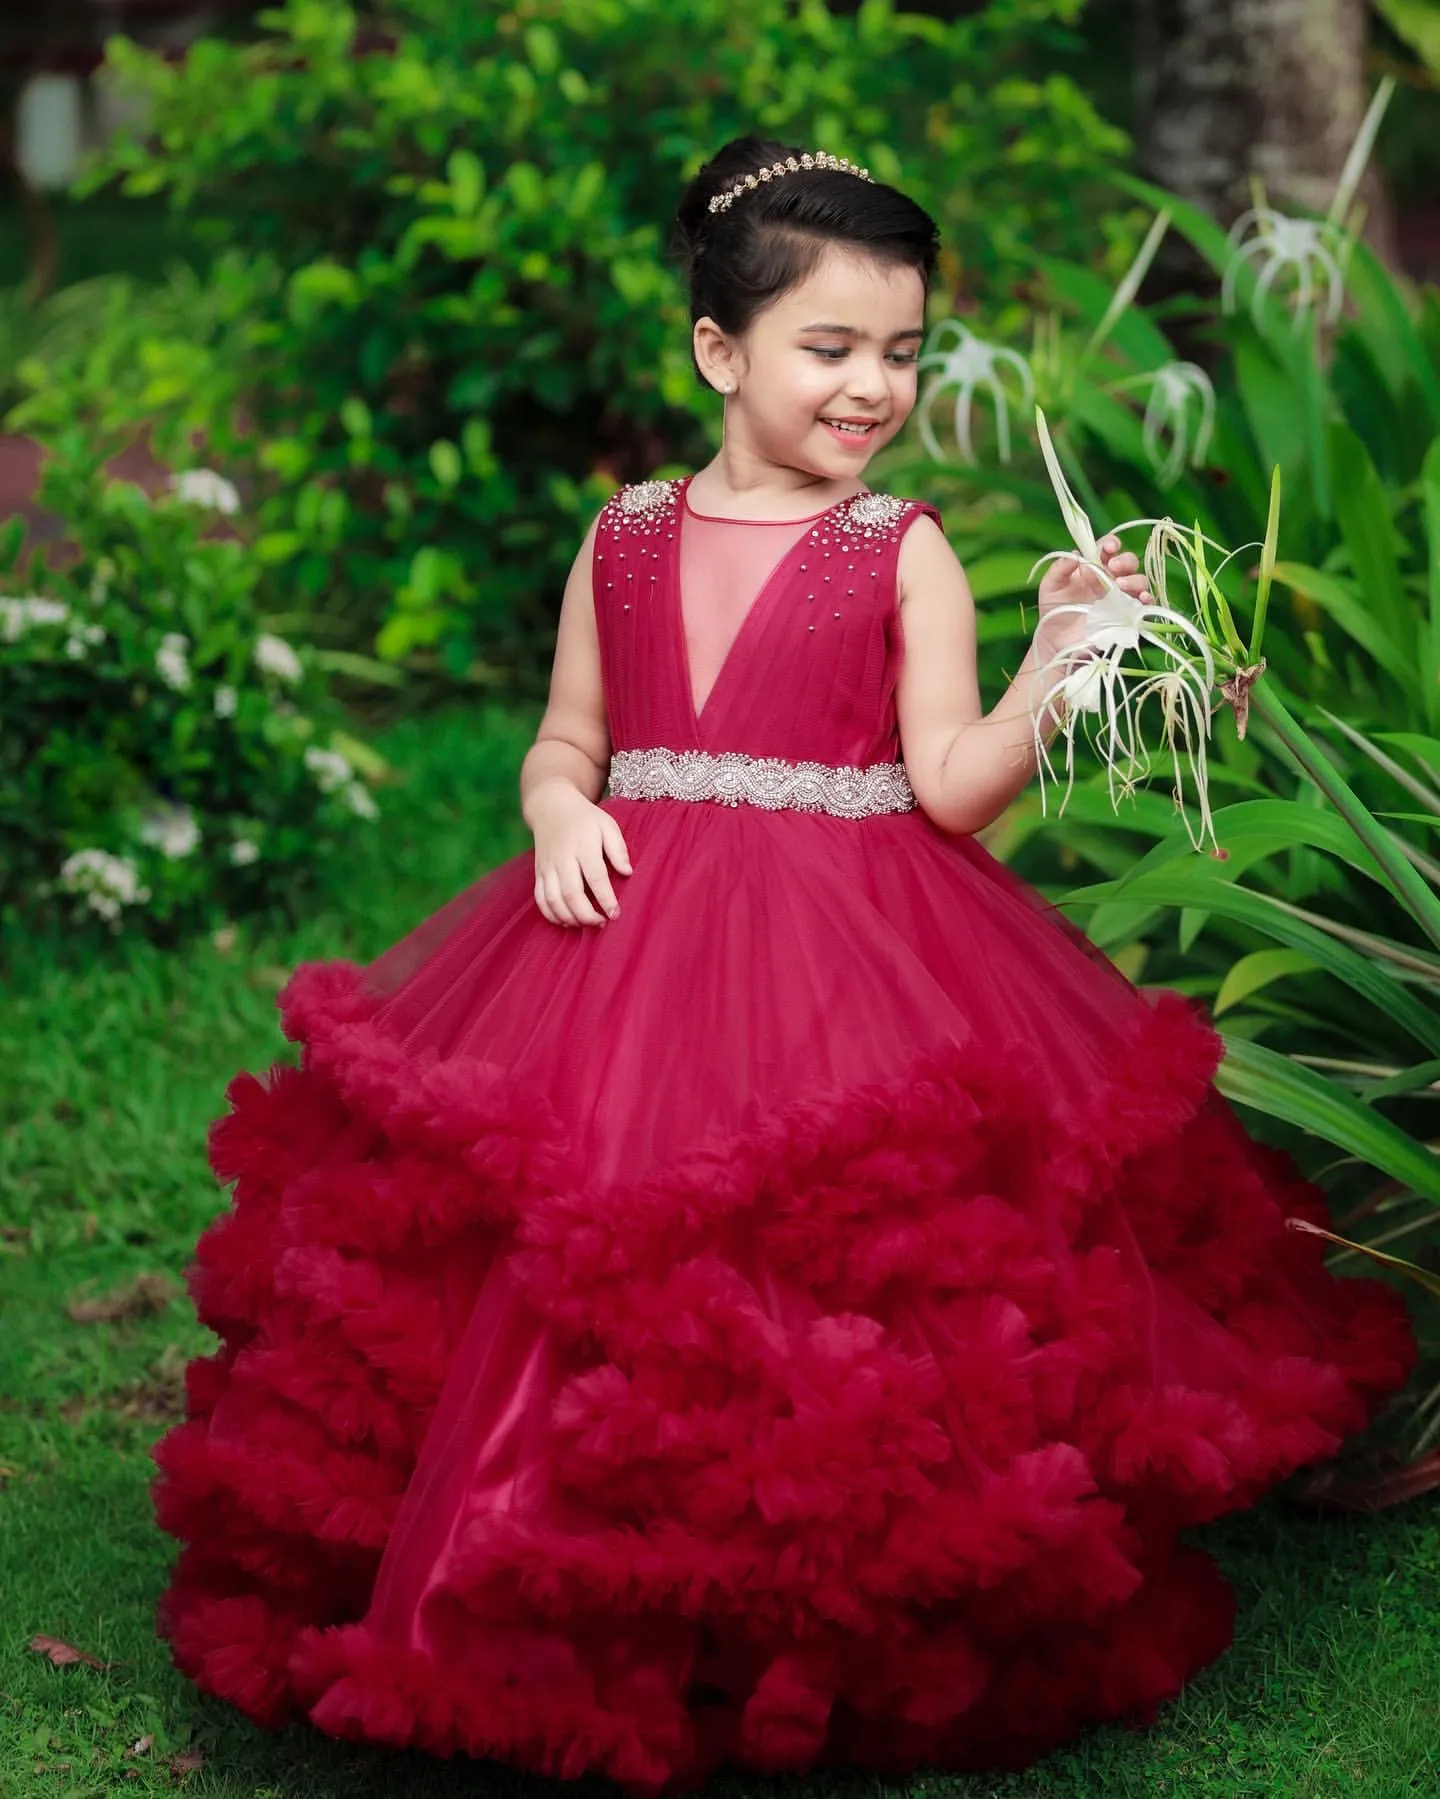 2023 Burgundy Crystals Flower Girl Dresses Ball Gown Tiers Tiers Vintage Little Girl Christmas Peageant Birthday Christening Tutu Dress Gowns ZJ4234